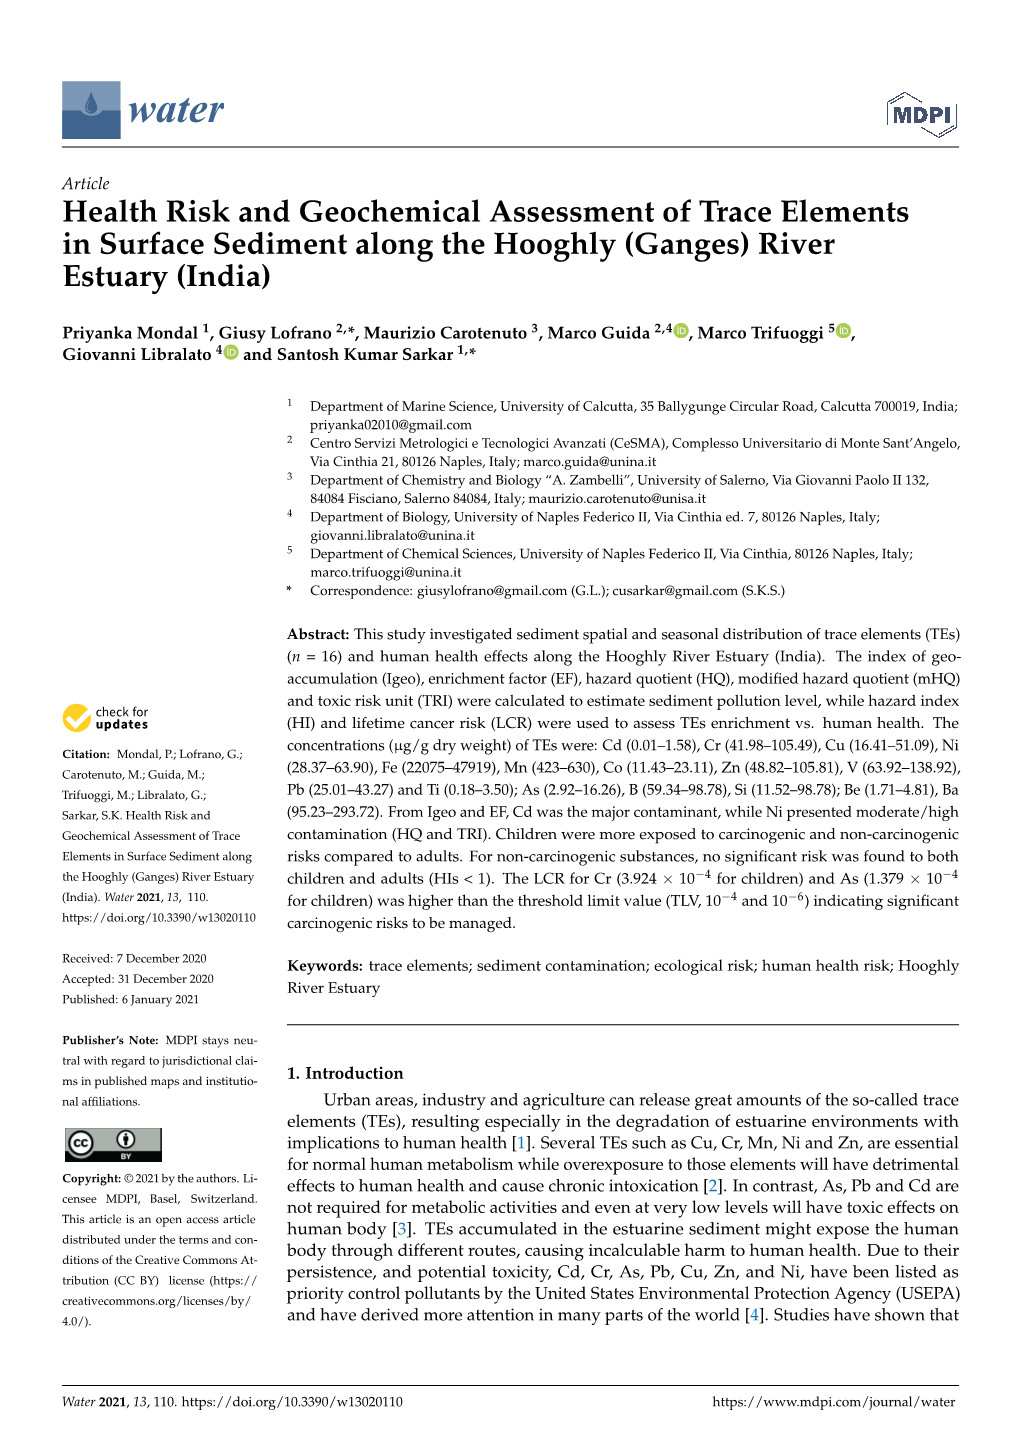 Health Risk and Geochemical Assessment of Trace Elements in Surface Sediment Along the Hooghly (Ganges) River Estuary (India)